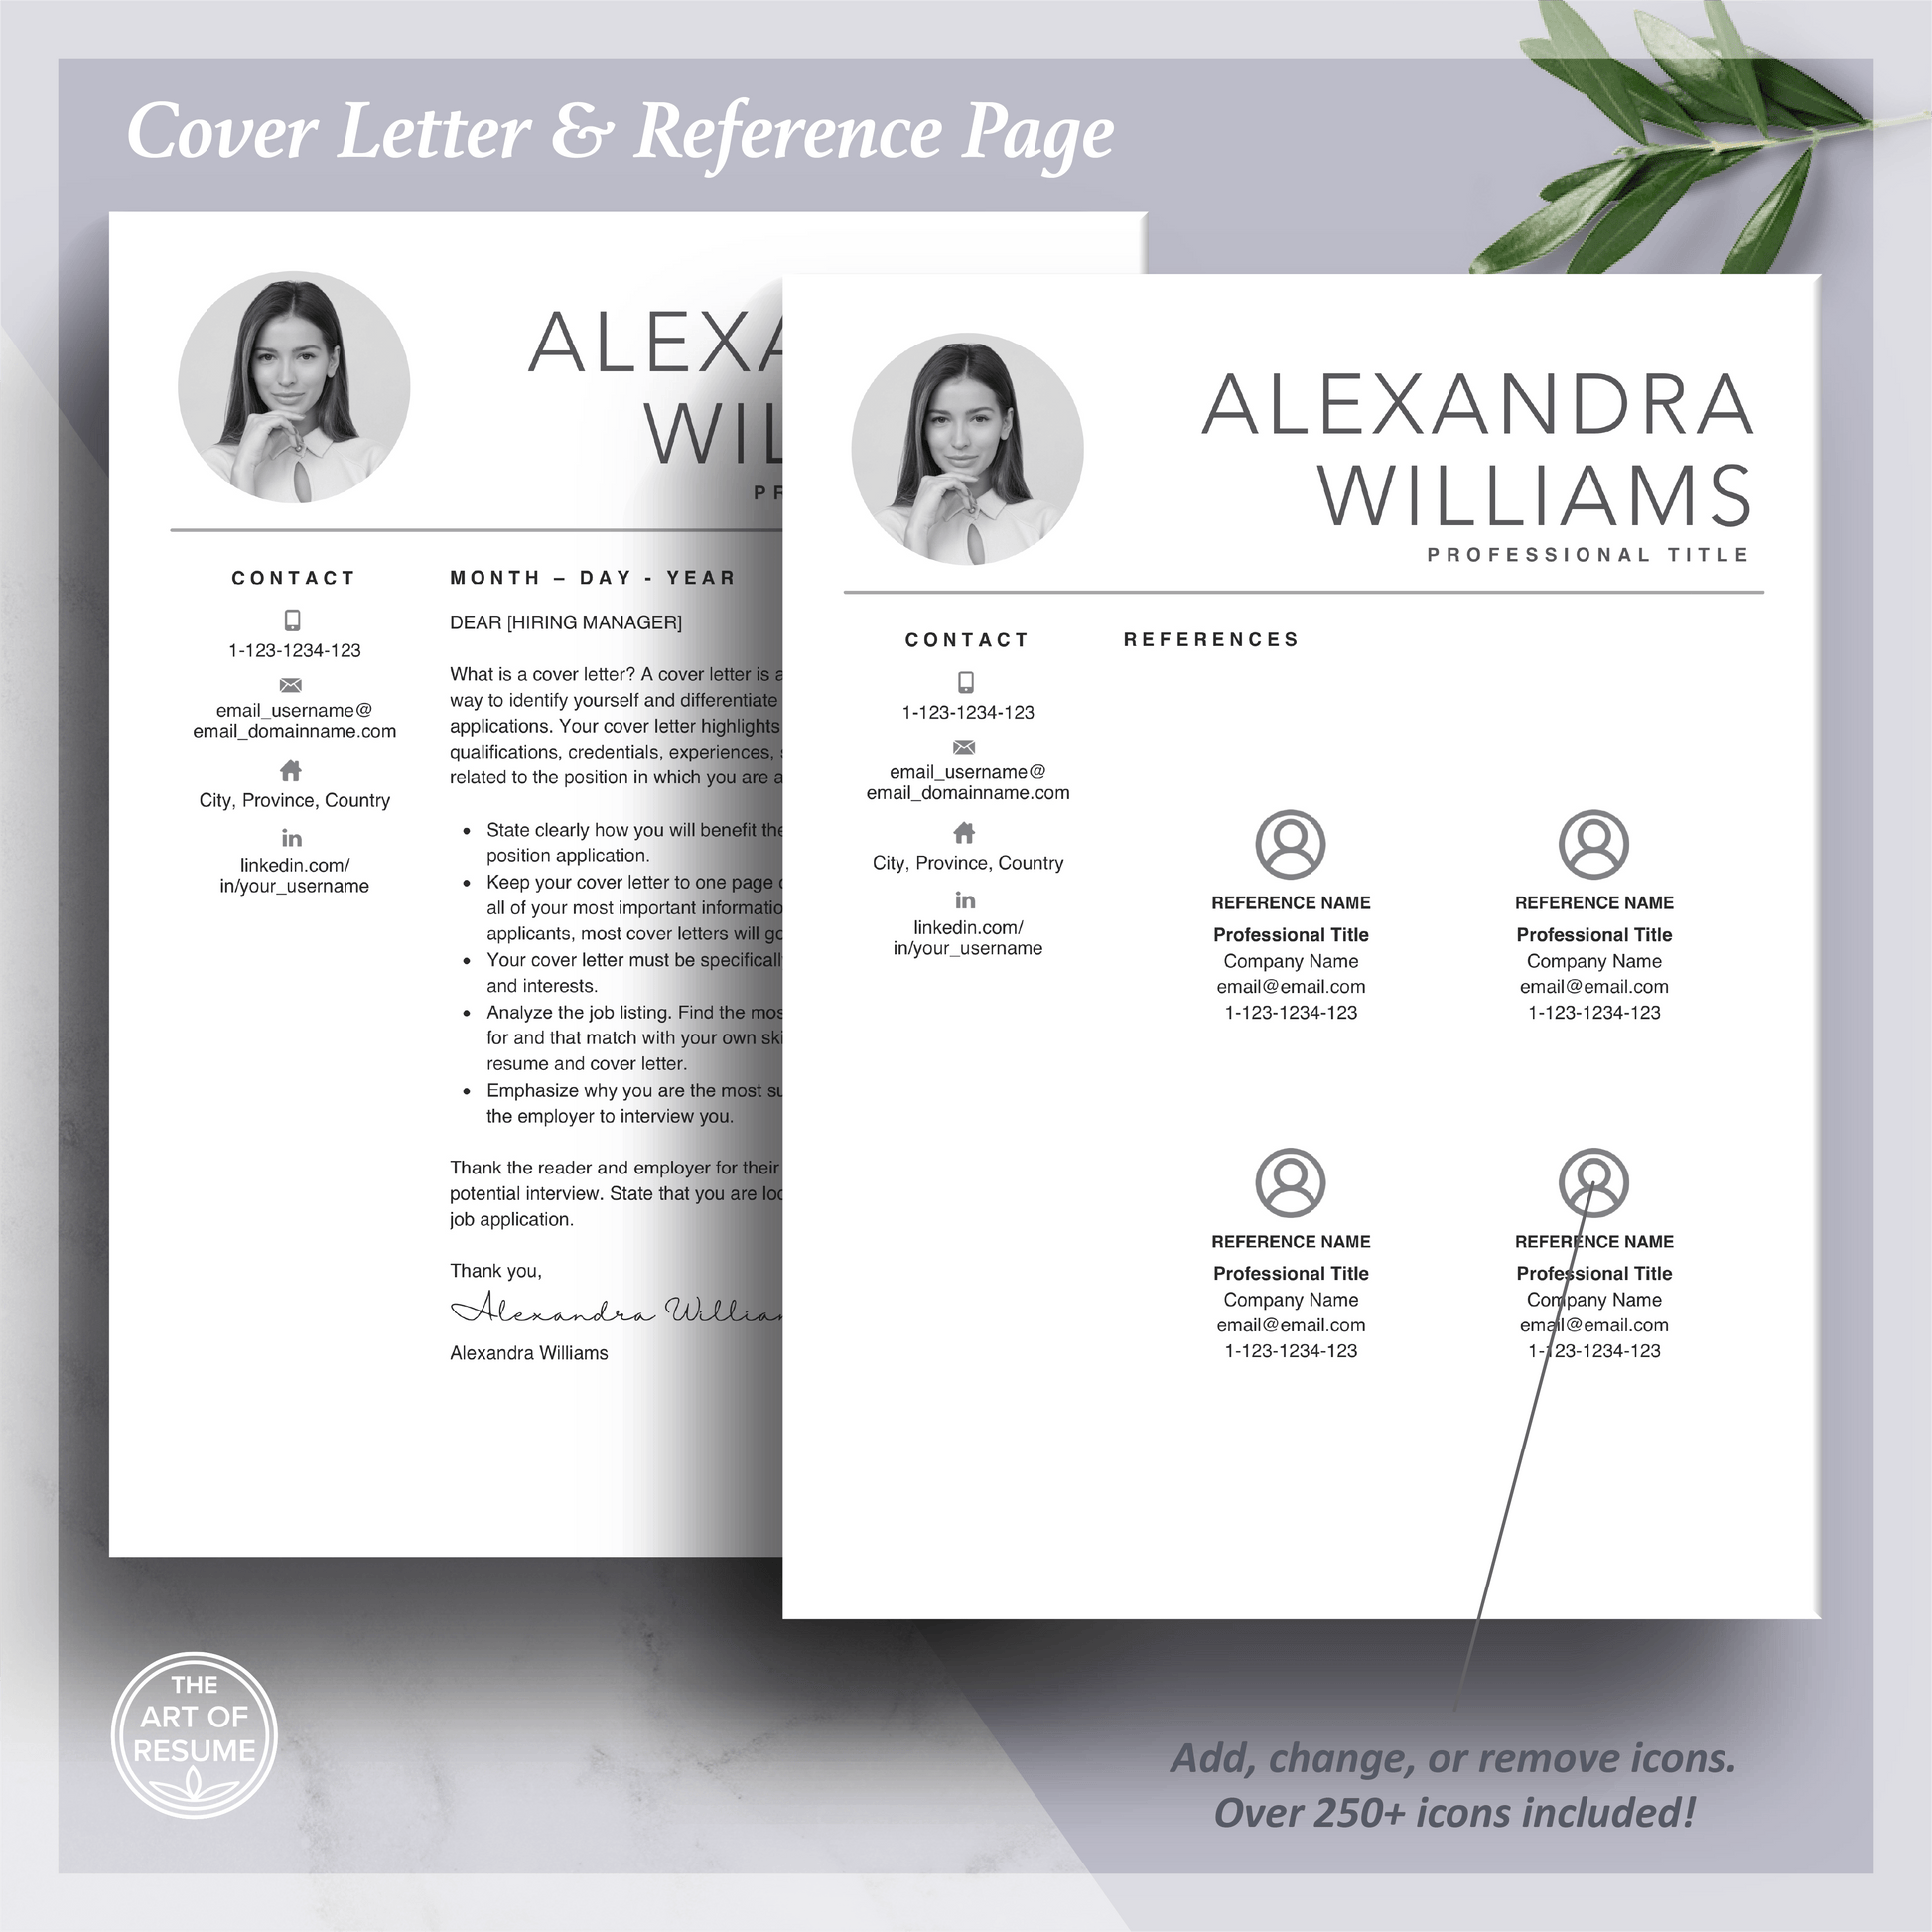 Professional Resume Template Design with Headshot Photo Insert - The Art of Resume